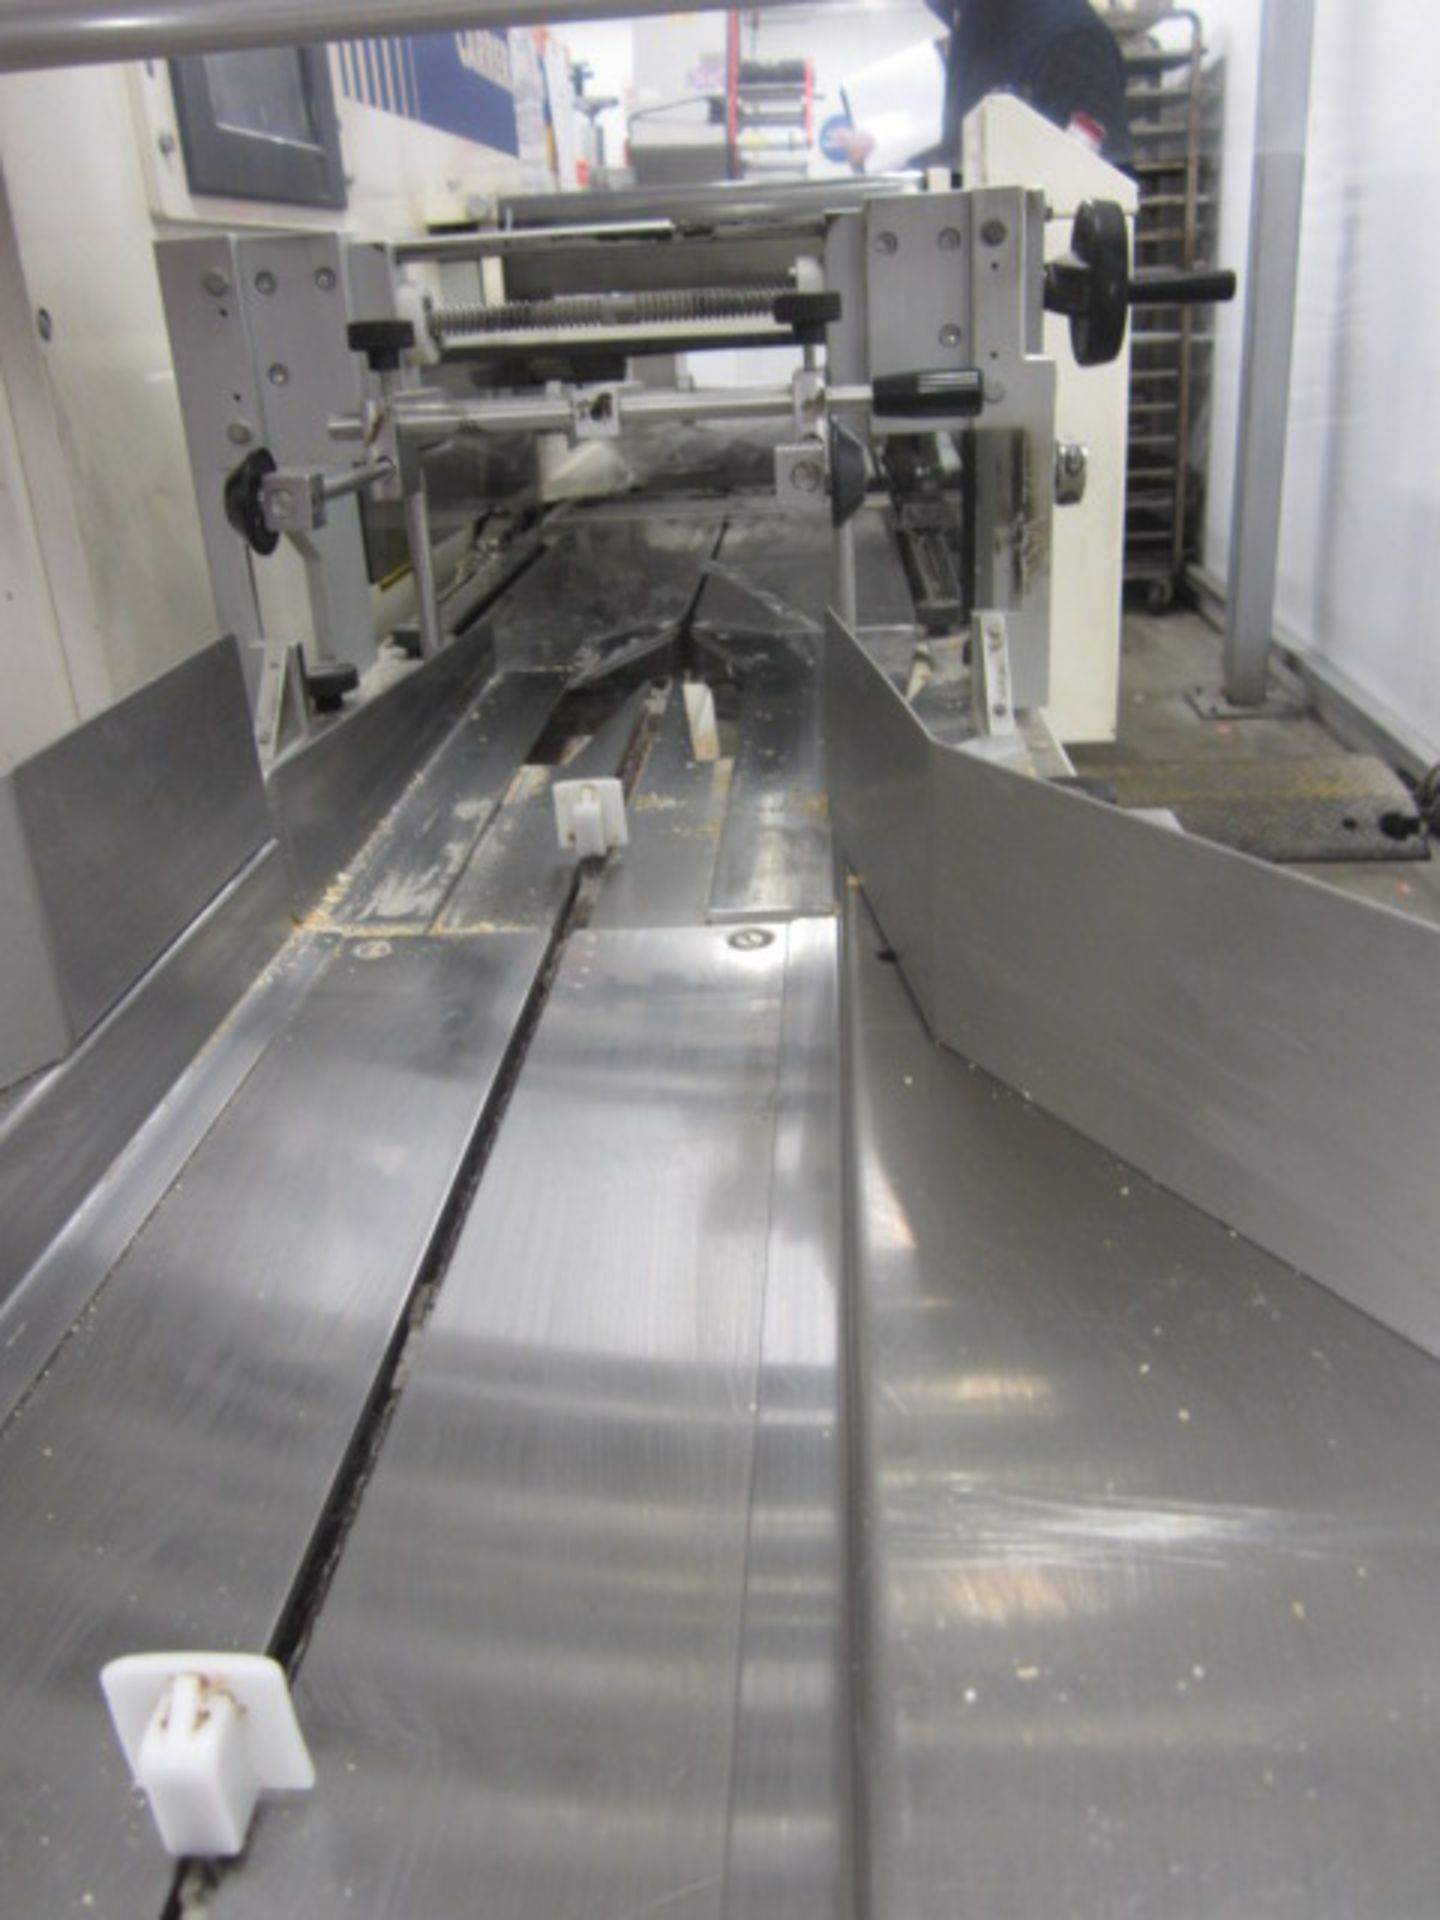 Ilapak Carrera 2000 PC flow wrapper, with stop/start and touch screen control s/n: 03 184 (2003) - Image 4 of 11